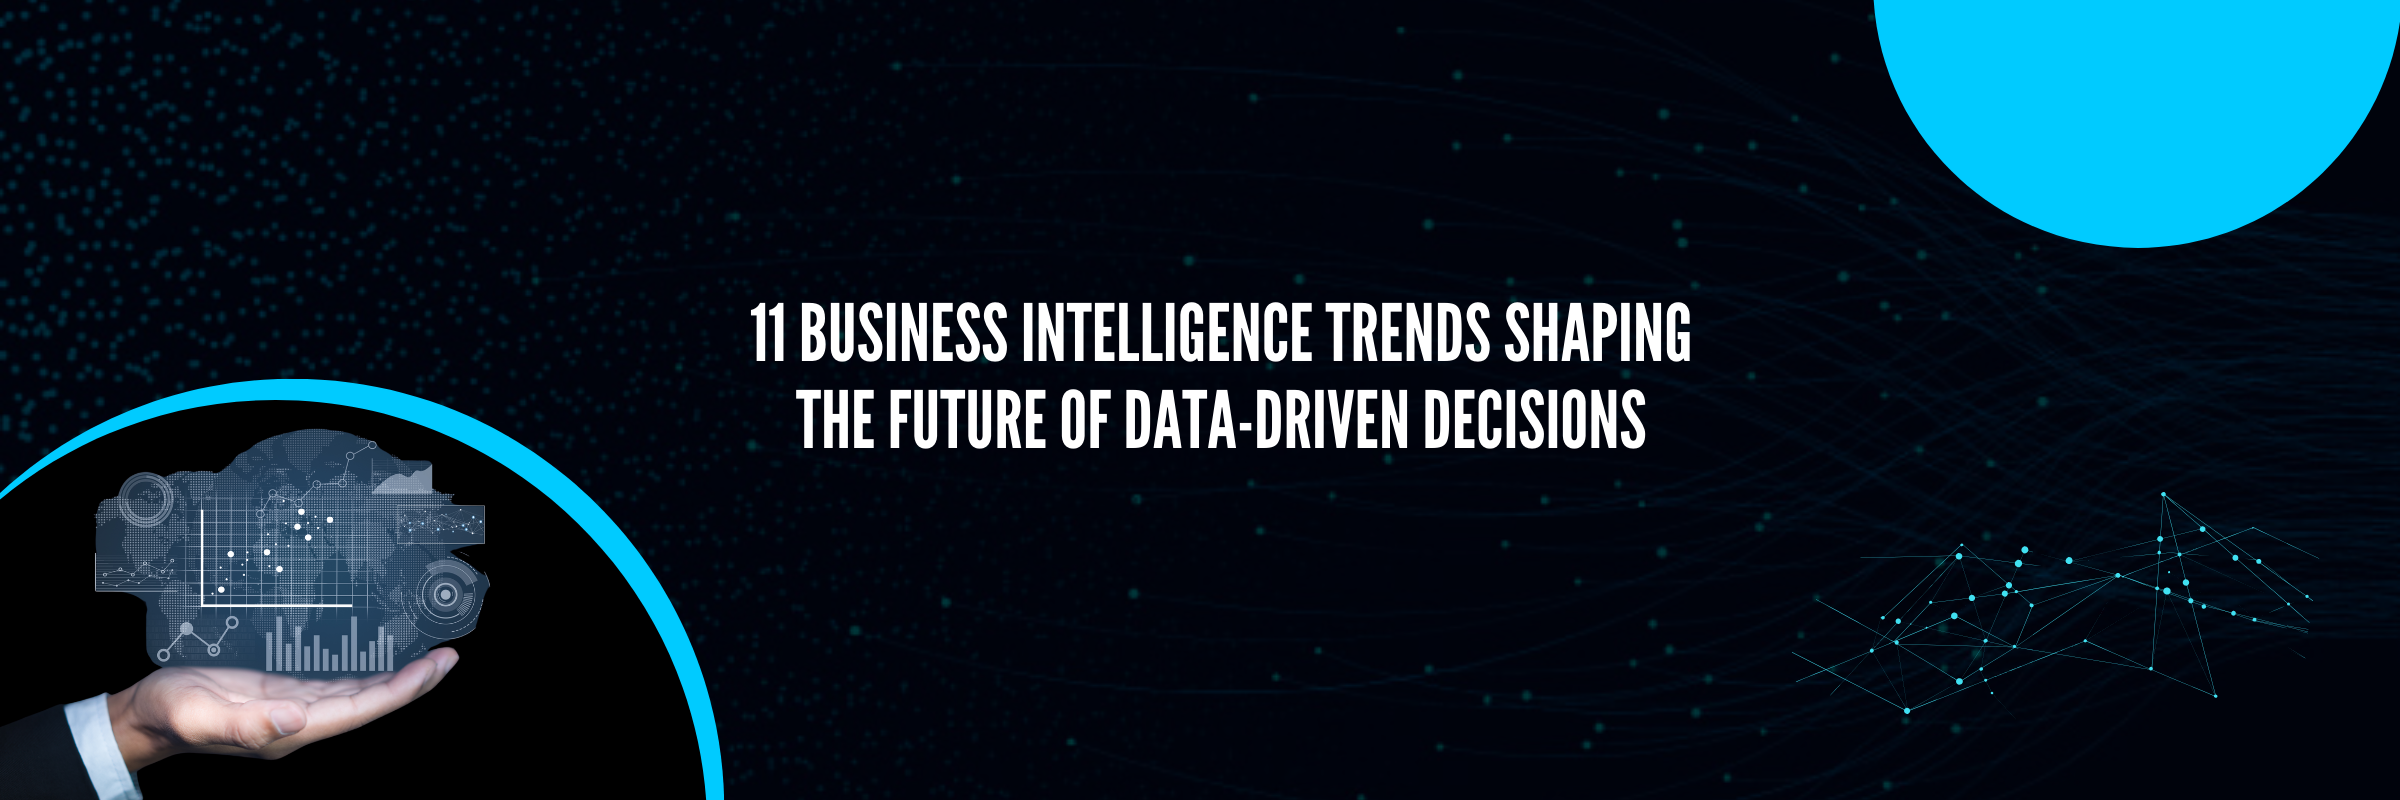 11 Business Intelligence Trends Shaping the Future of Data-Driven Decisions